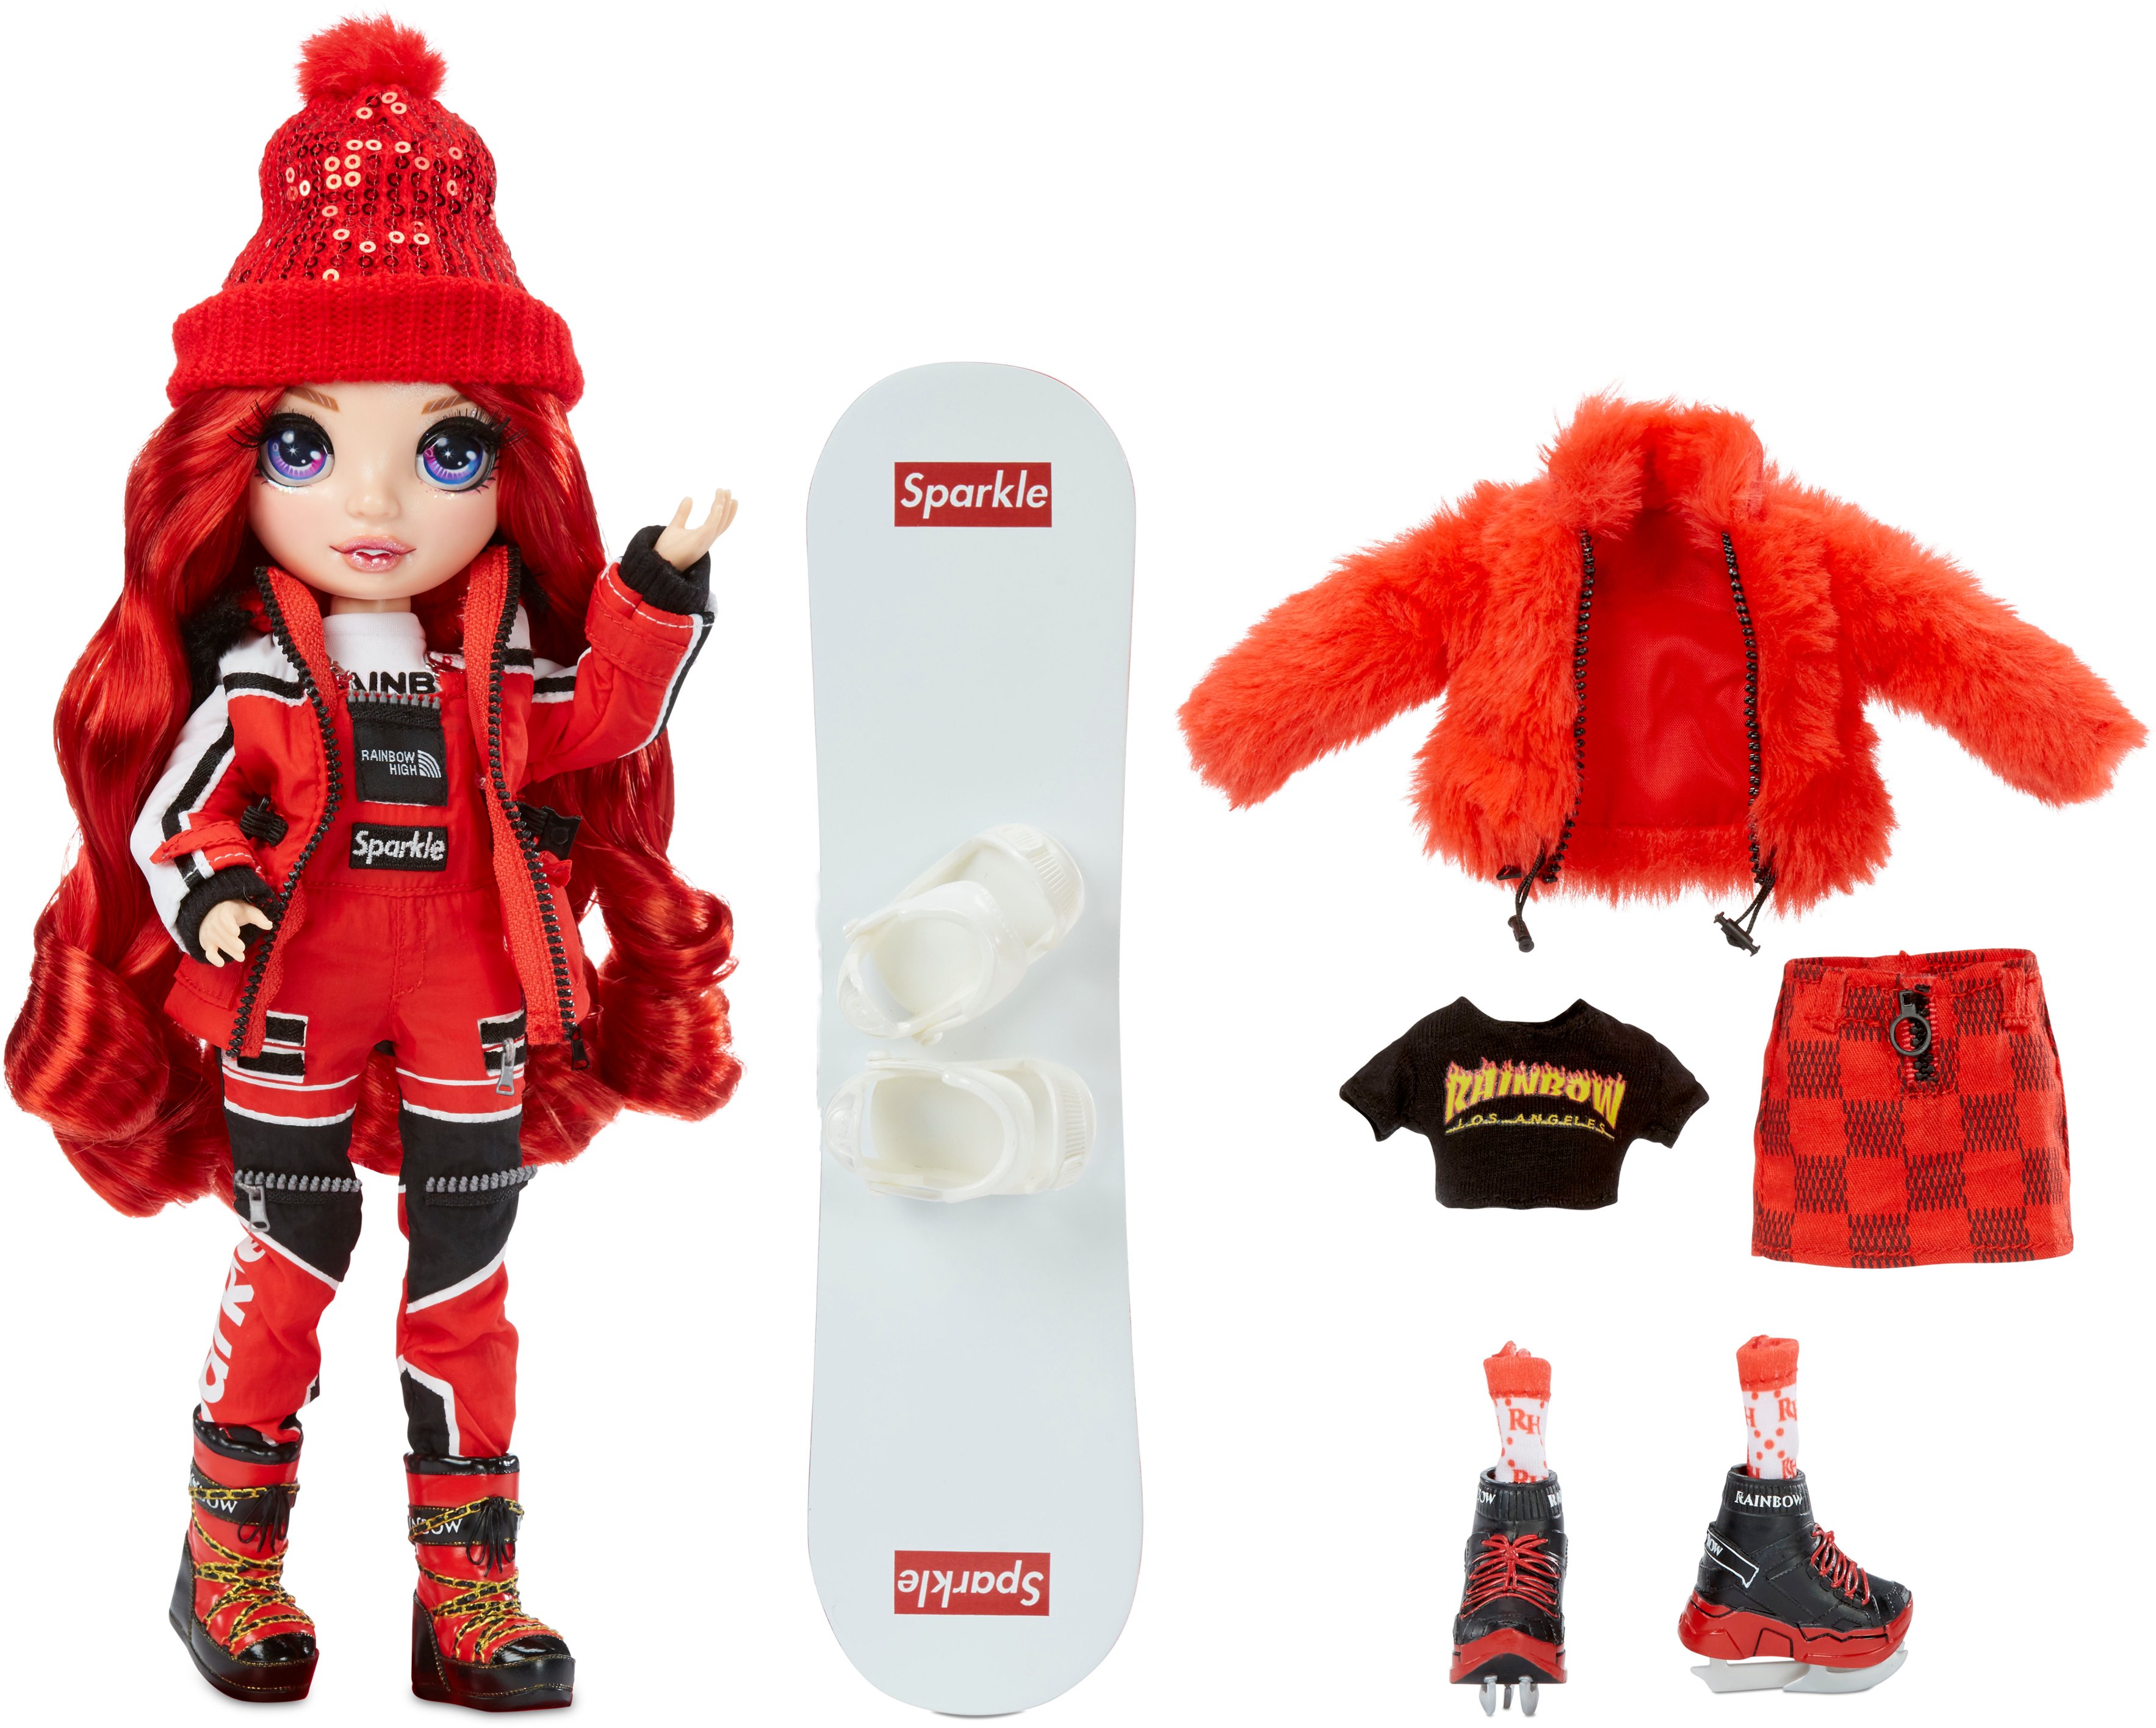 Angle View: Rainbow High - Winter Break Doll- Ruby Anderson (Red)